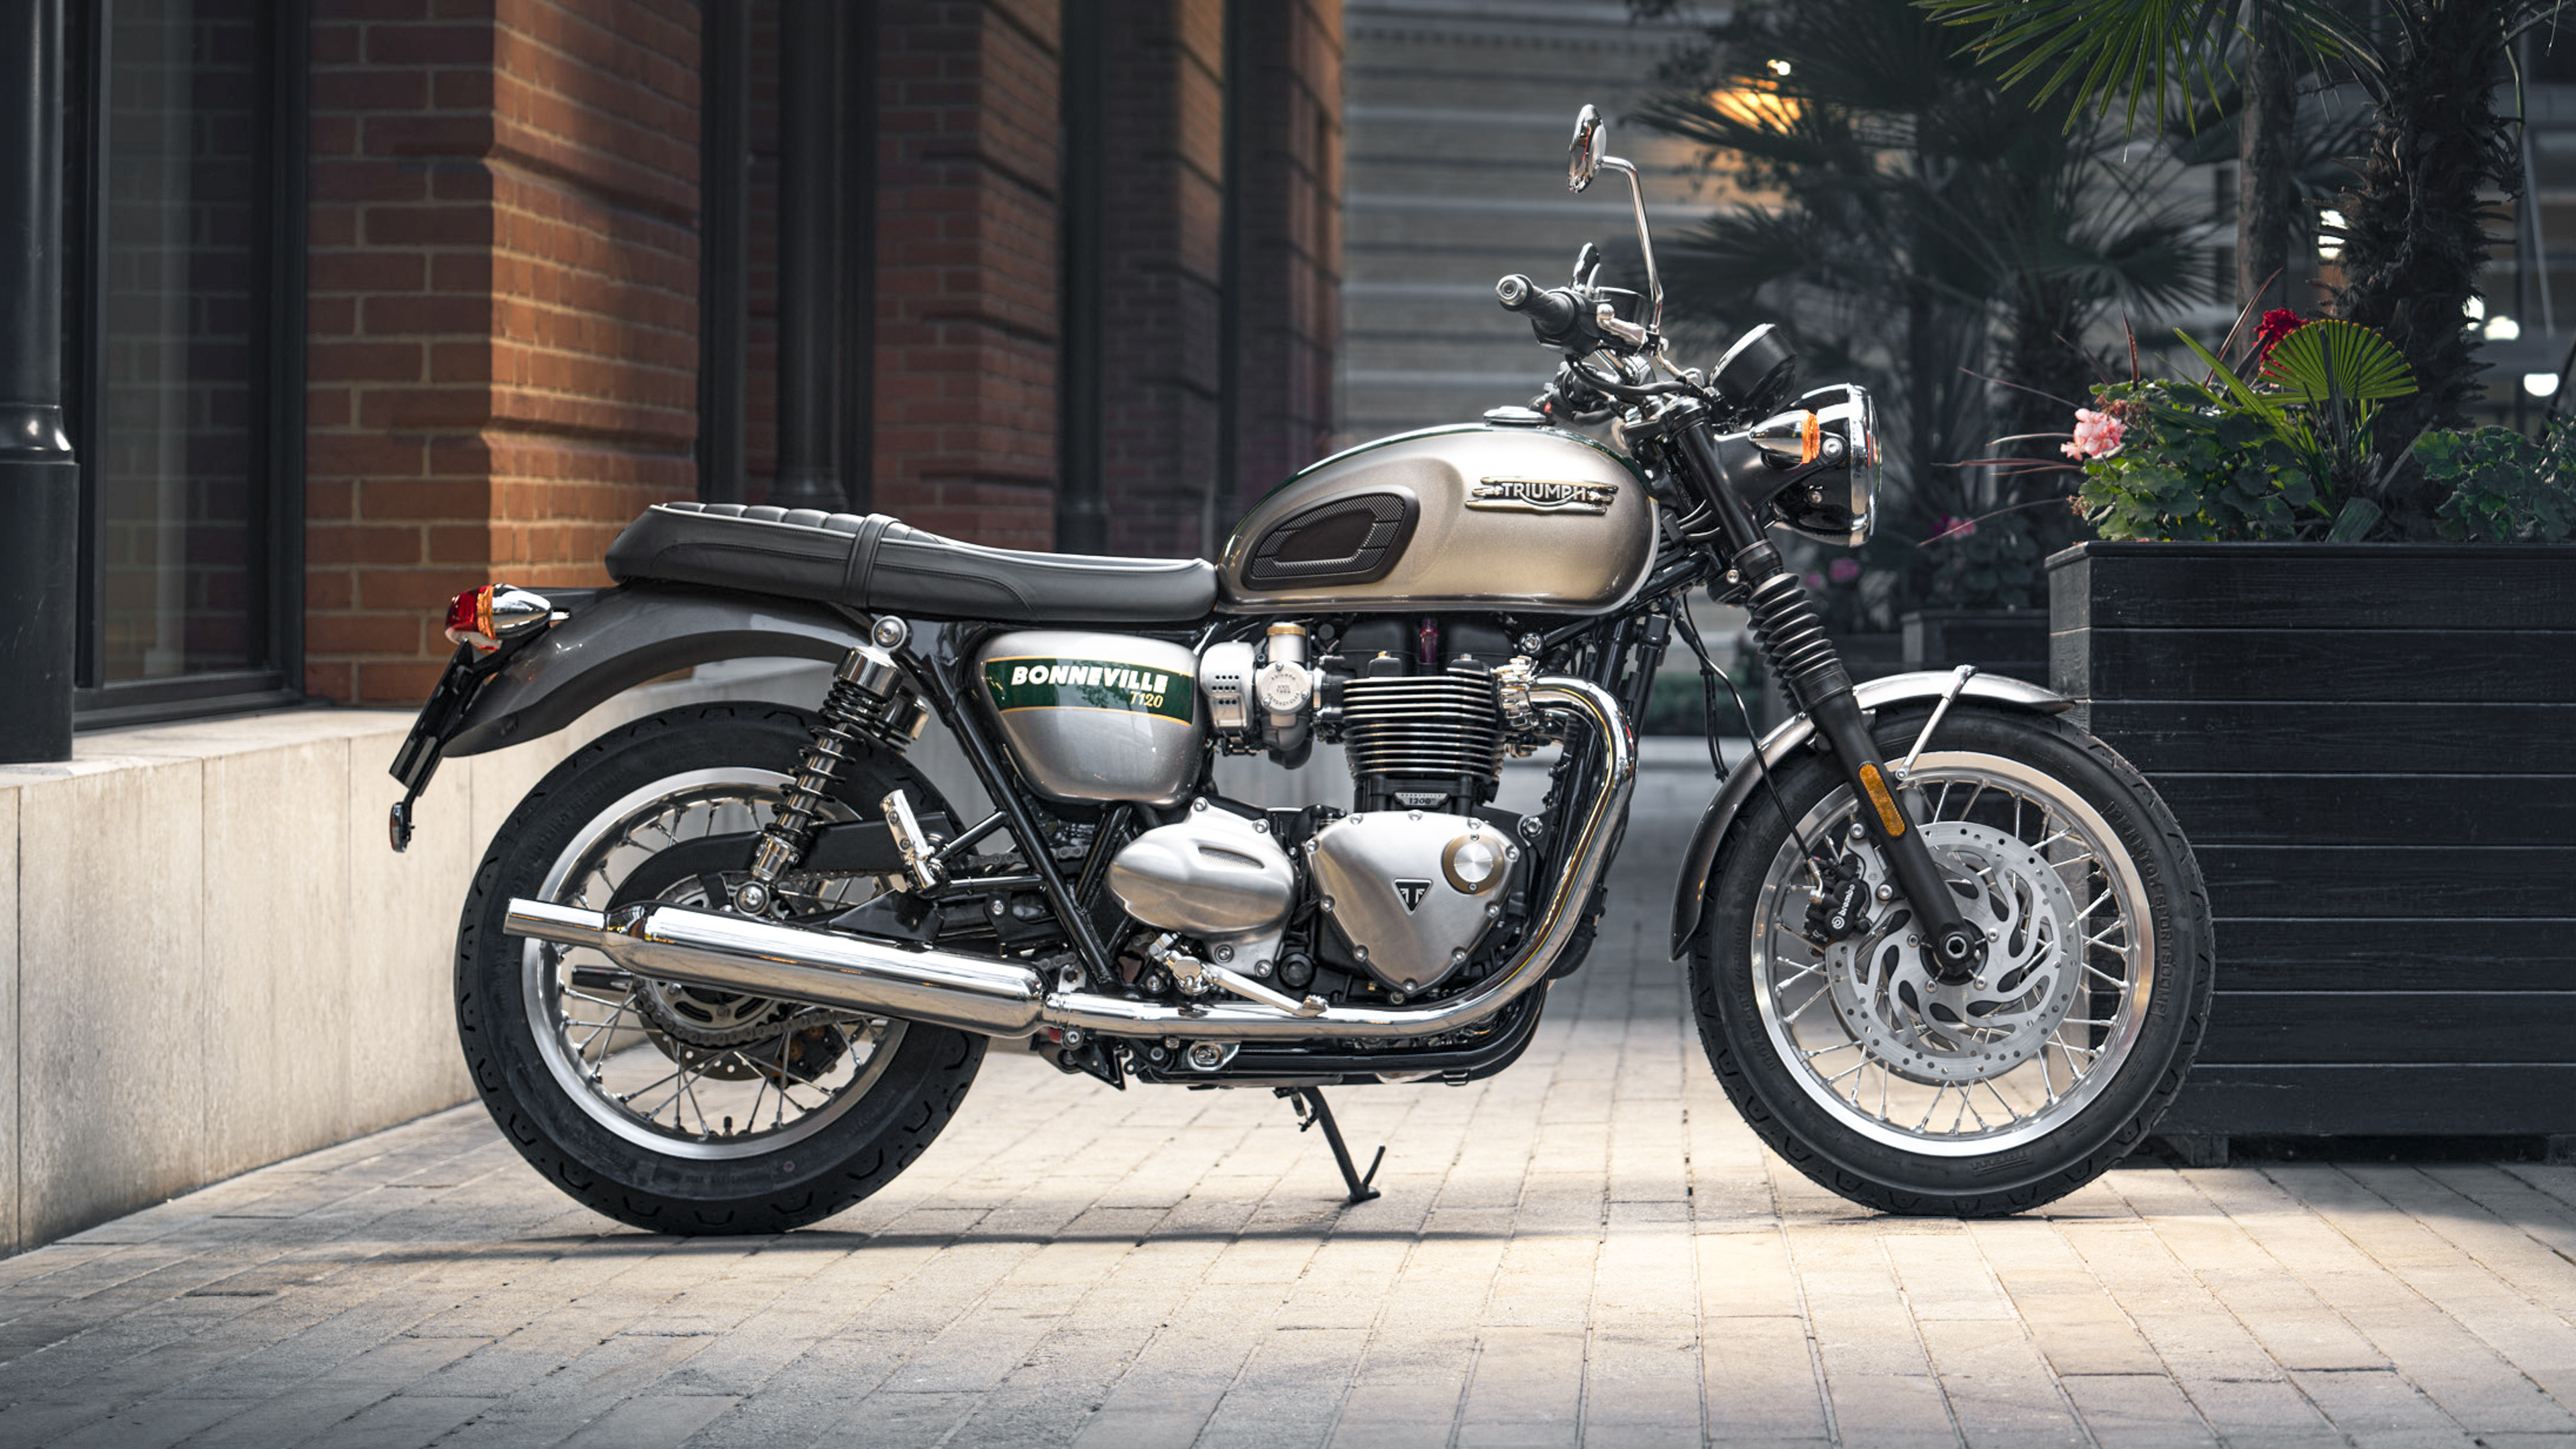 Triumph Bonneville T120 Gold Line, Limited availability, Time-bound exclusivity, Luxury in motorcycling, 3840x2160 4K Desktop